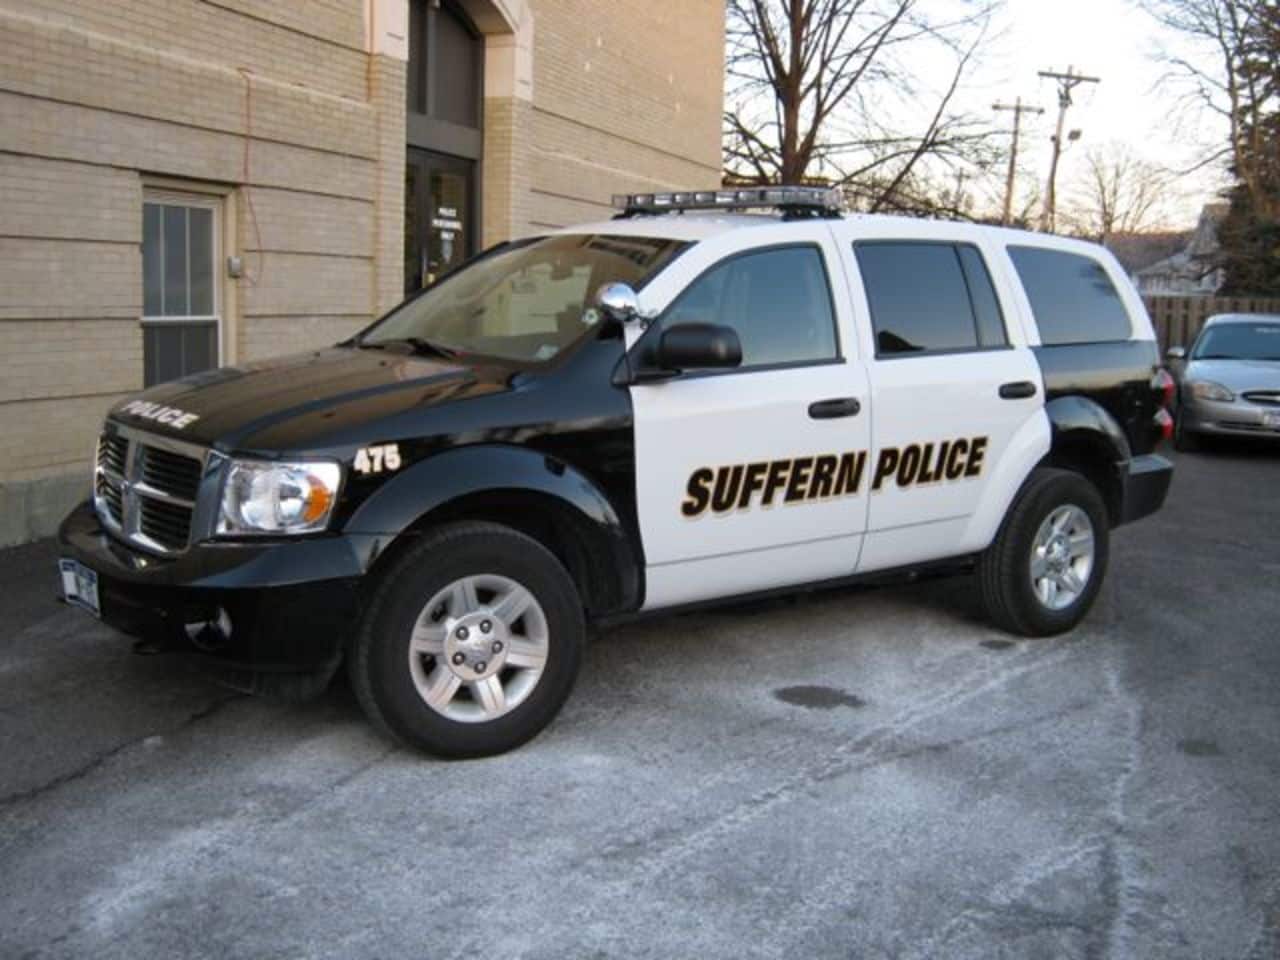 Suffern police charged Anton Compas with “obstruction of breathing.”